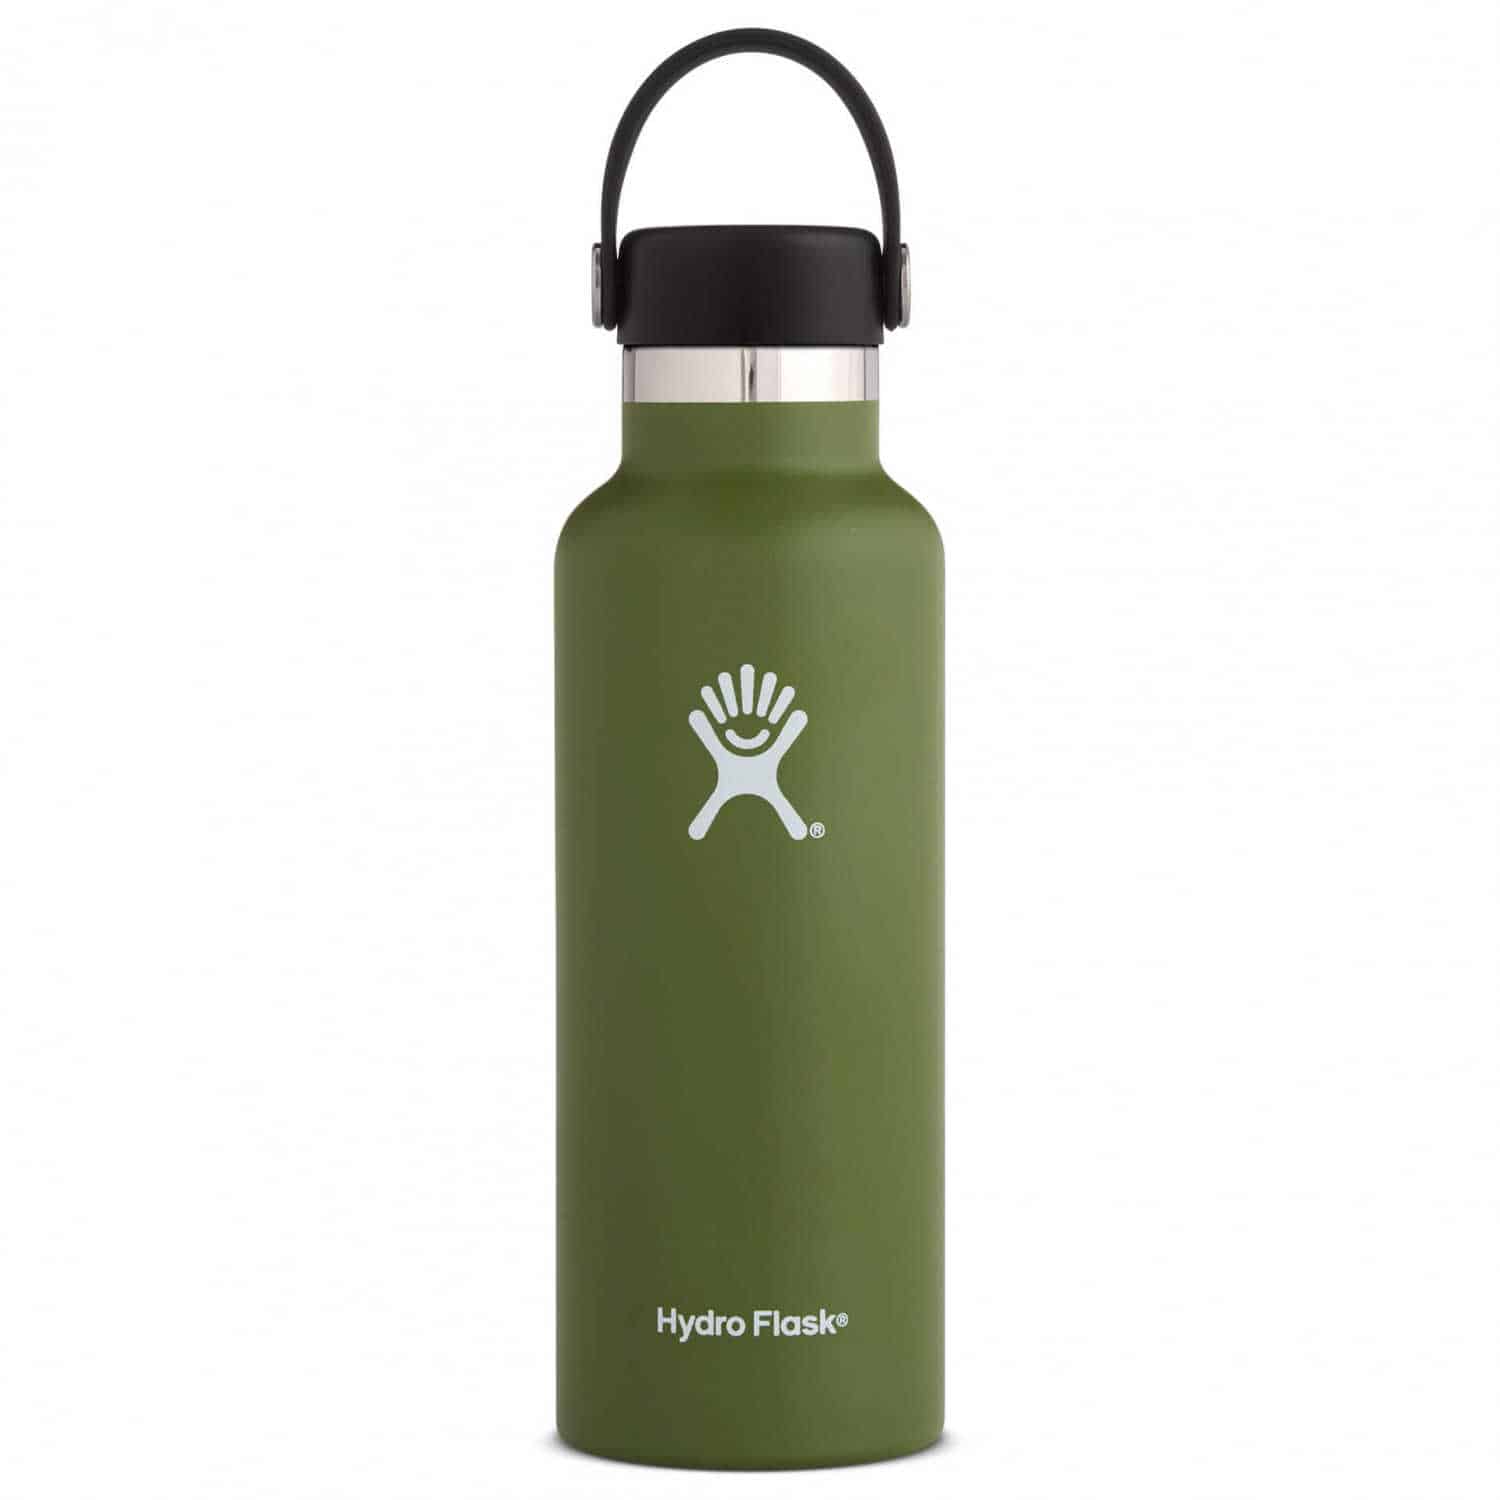 Hydroflask in green - an eco-friendly gift idea for Christmas